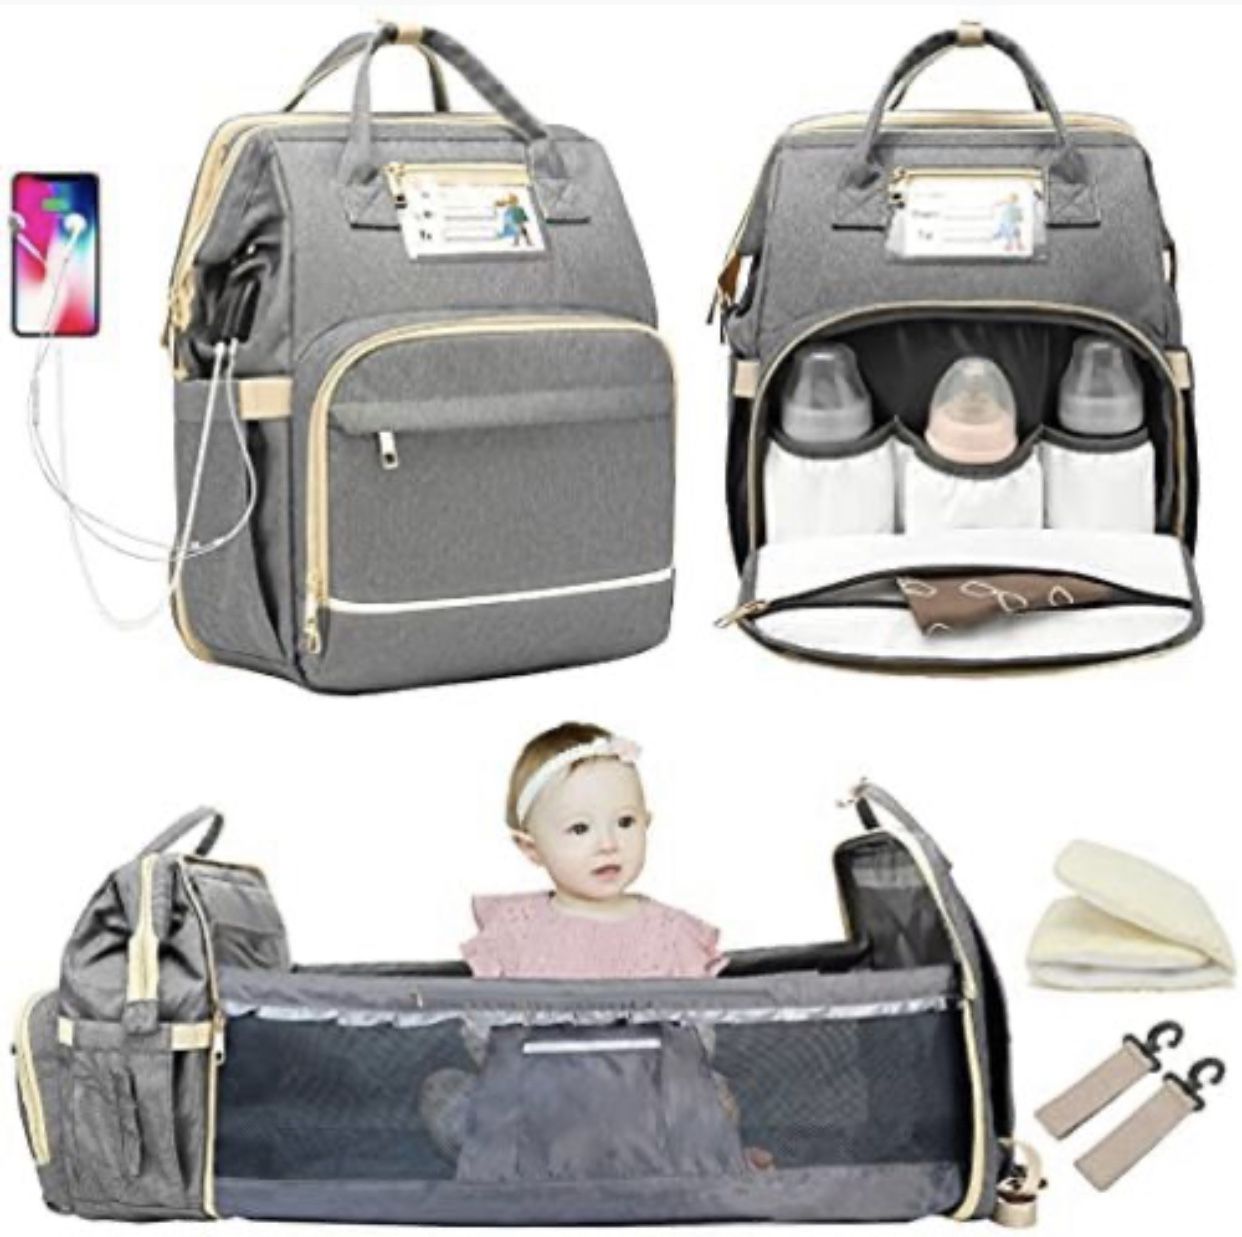 Granrouto Baby Diapers Bag Mommy Bag,Diaper Bags Backpack with Foldable Baby Crib,Portable Newborn Diaper Bag